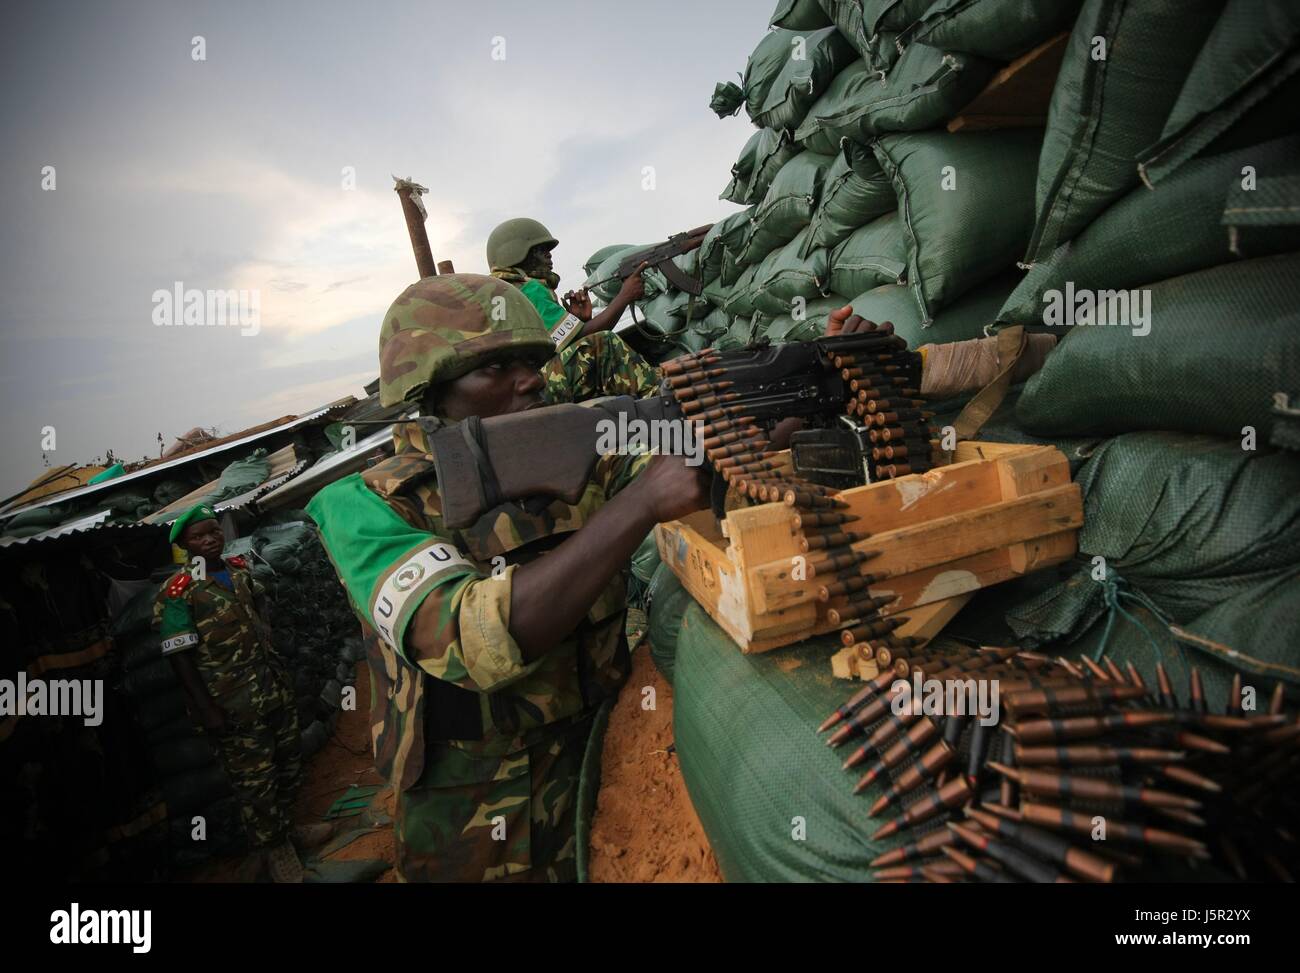 African Union Mission in Somalia (AMISOM) Burundian soldiers man the frontline in a territory recently captured from insurgents in the Deynile District November 17, 2011 near Mogadishu, Somalia.    (photo by Stuart Price/ANISOM via Planetpix) Stock Photo